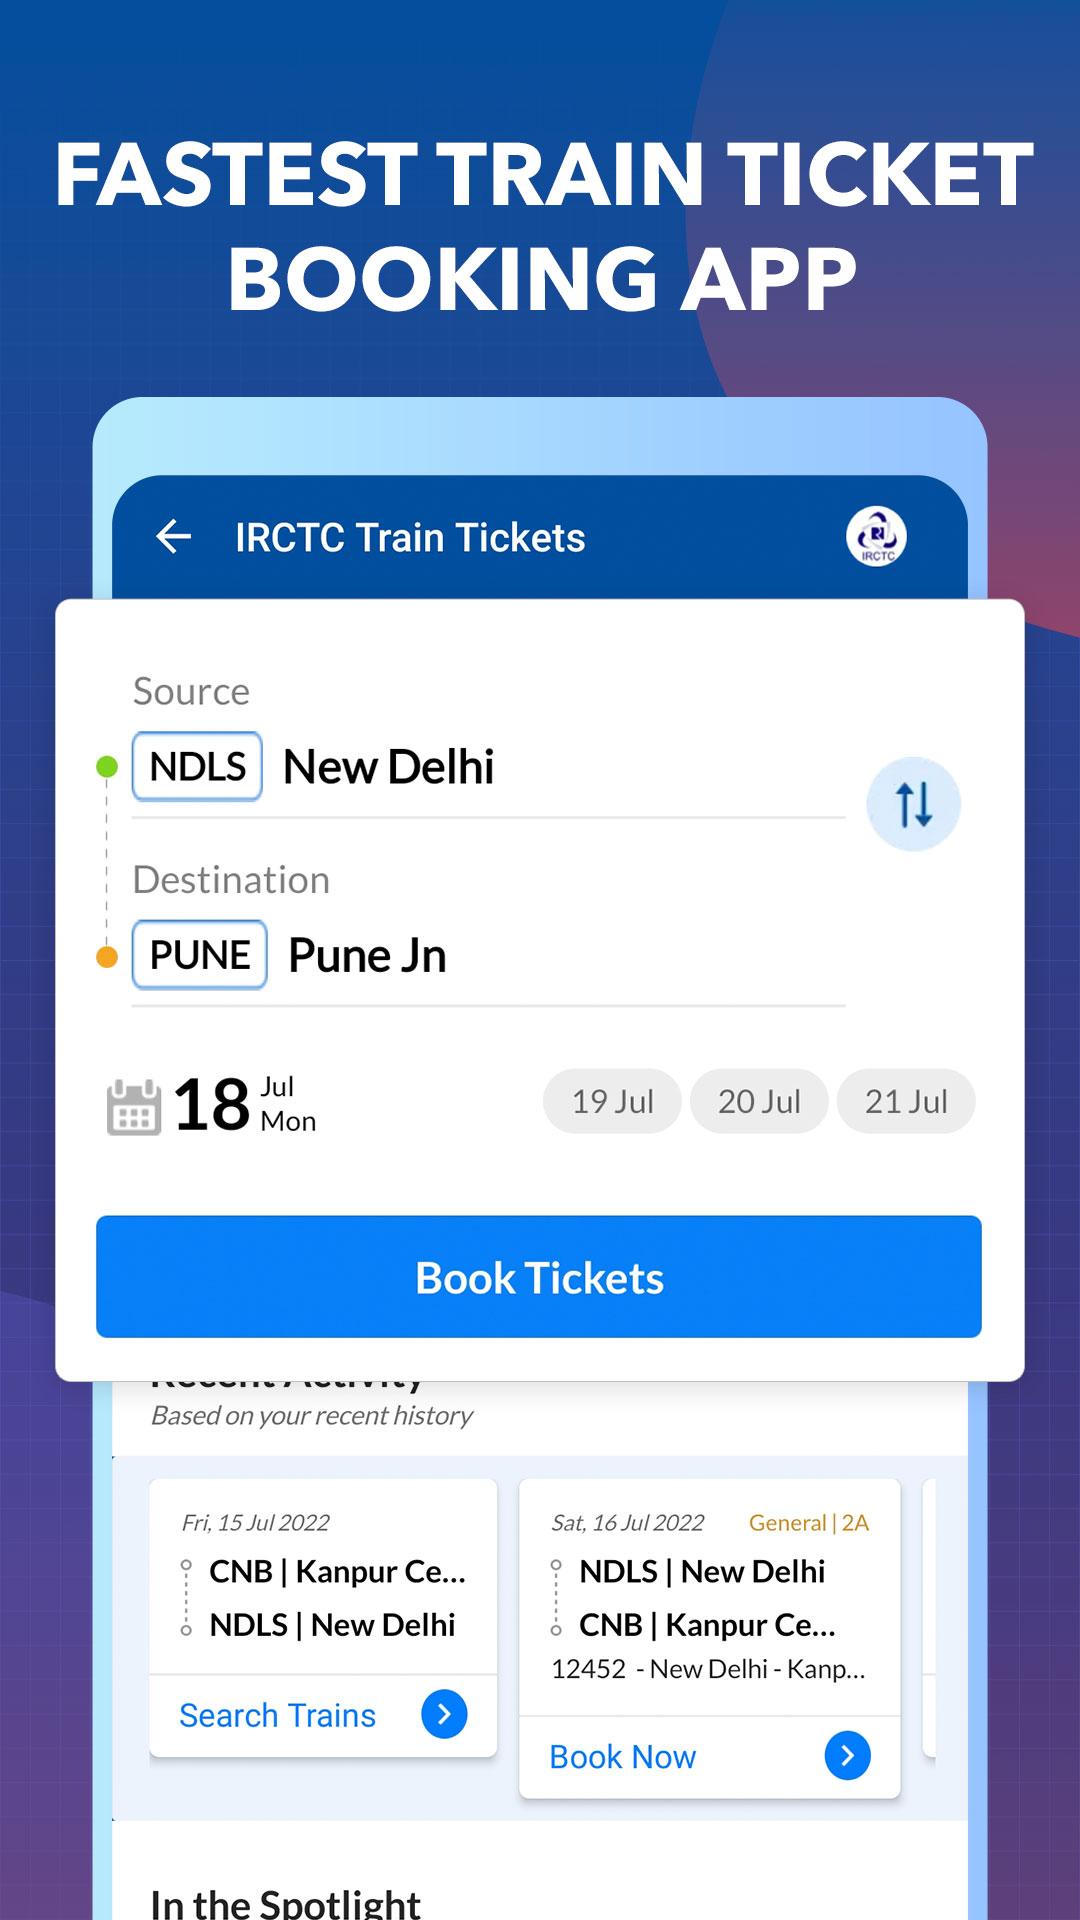 Train tickets booking. Android book app maker 3.3.0.0 ключ.